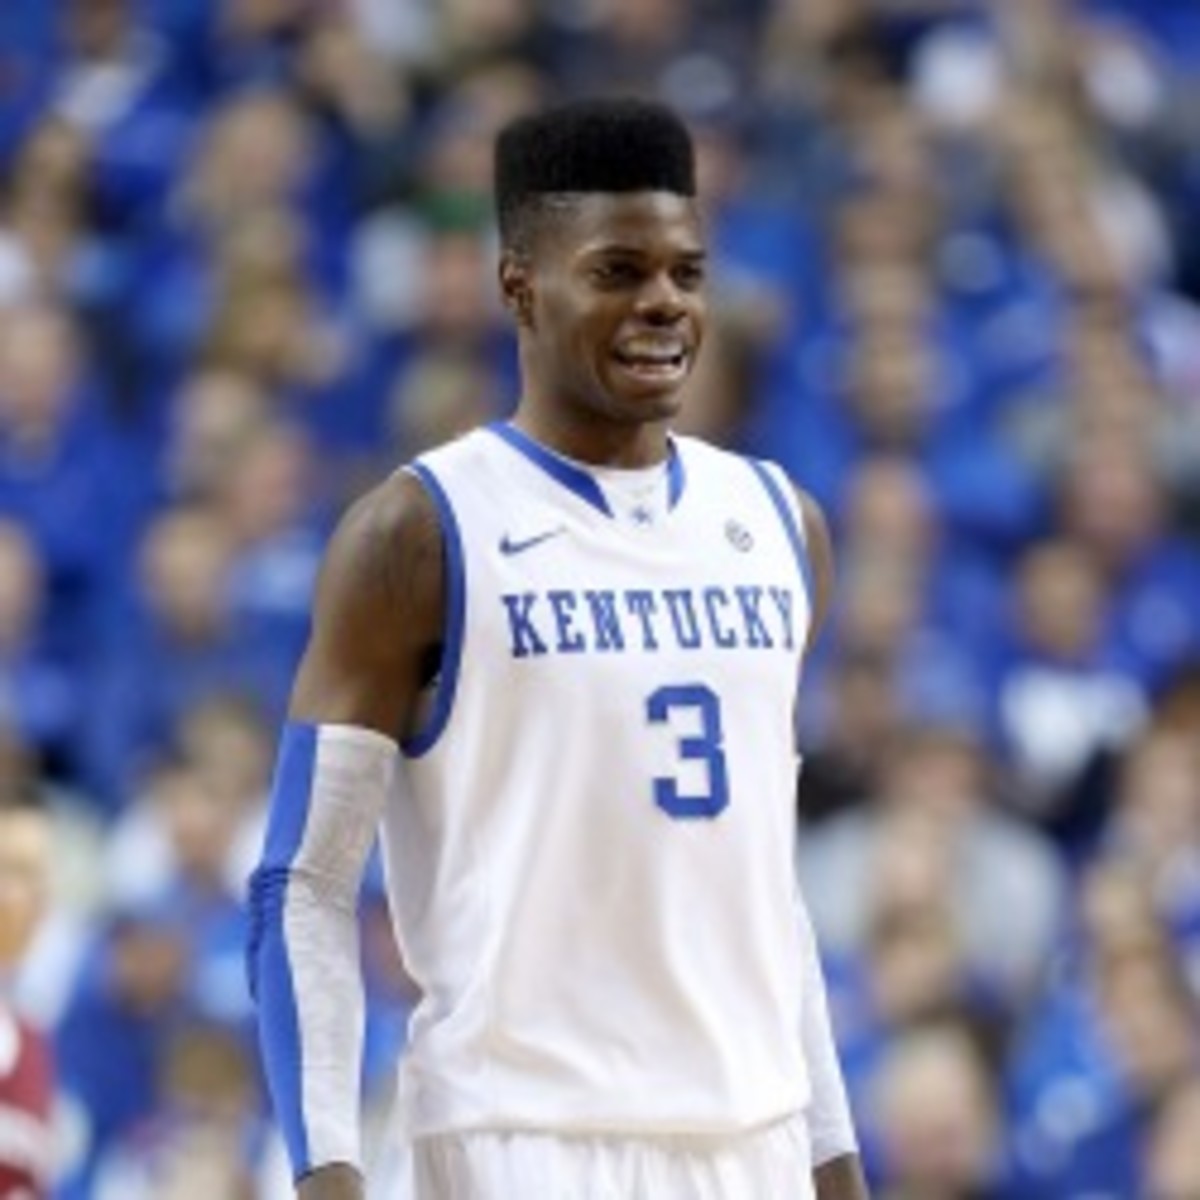 Kentucky freshman Nerlens Noel injured his left knee and was taken to a hospital for evaluation. (Andy Lyons/Getty Images)